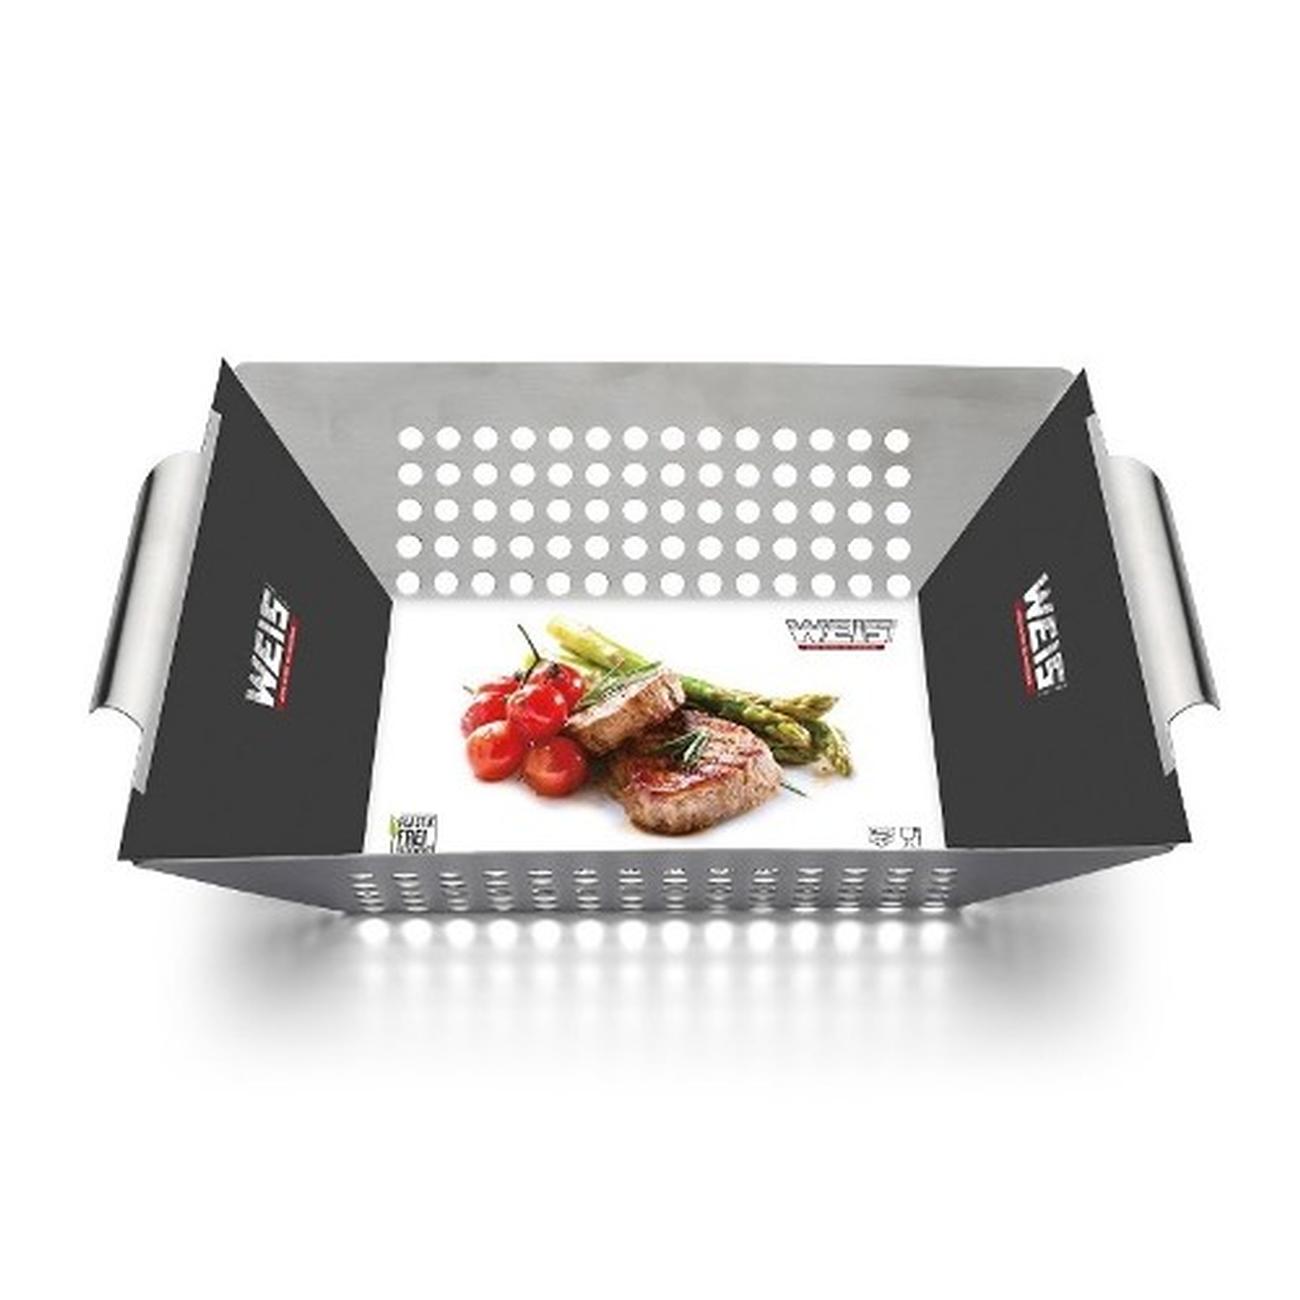 weis-stainless-steel-bbq-grilling-basket-30cm - Stainless Steel Grill Basket Tray 30cm